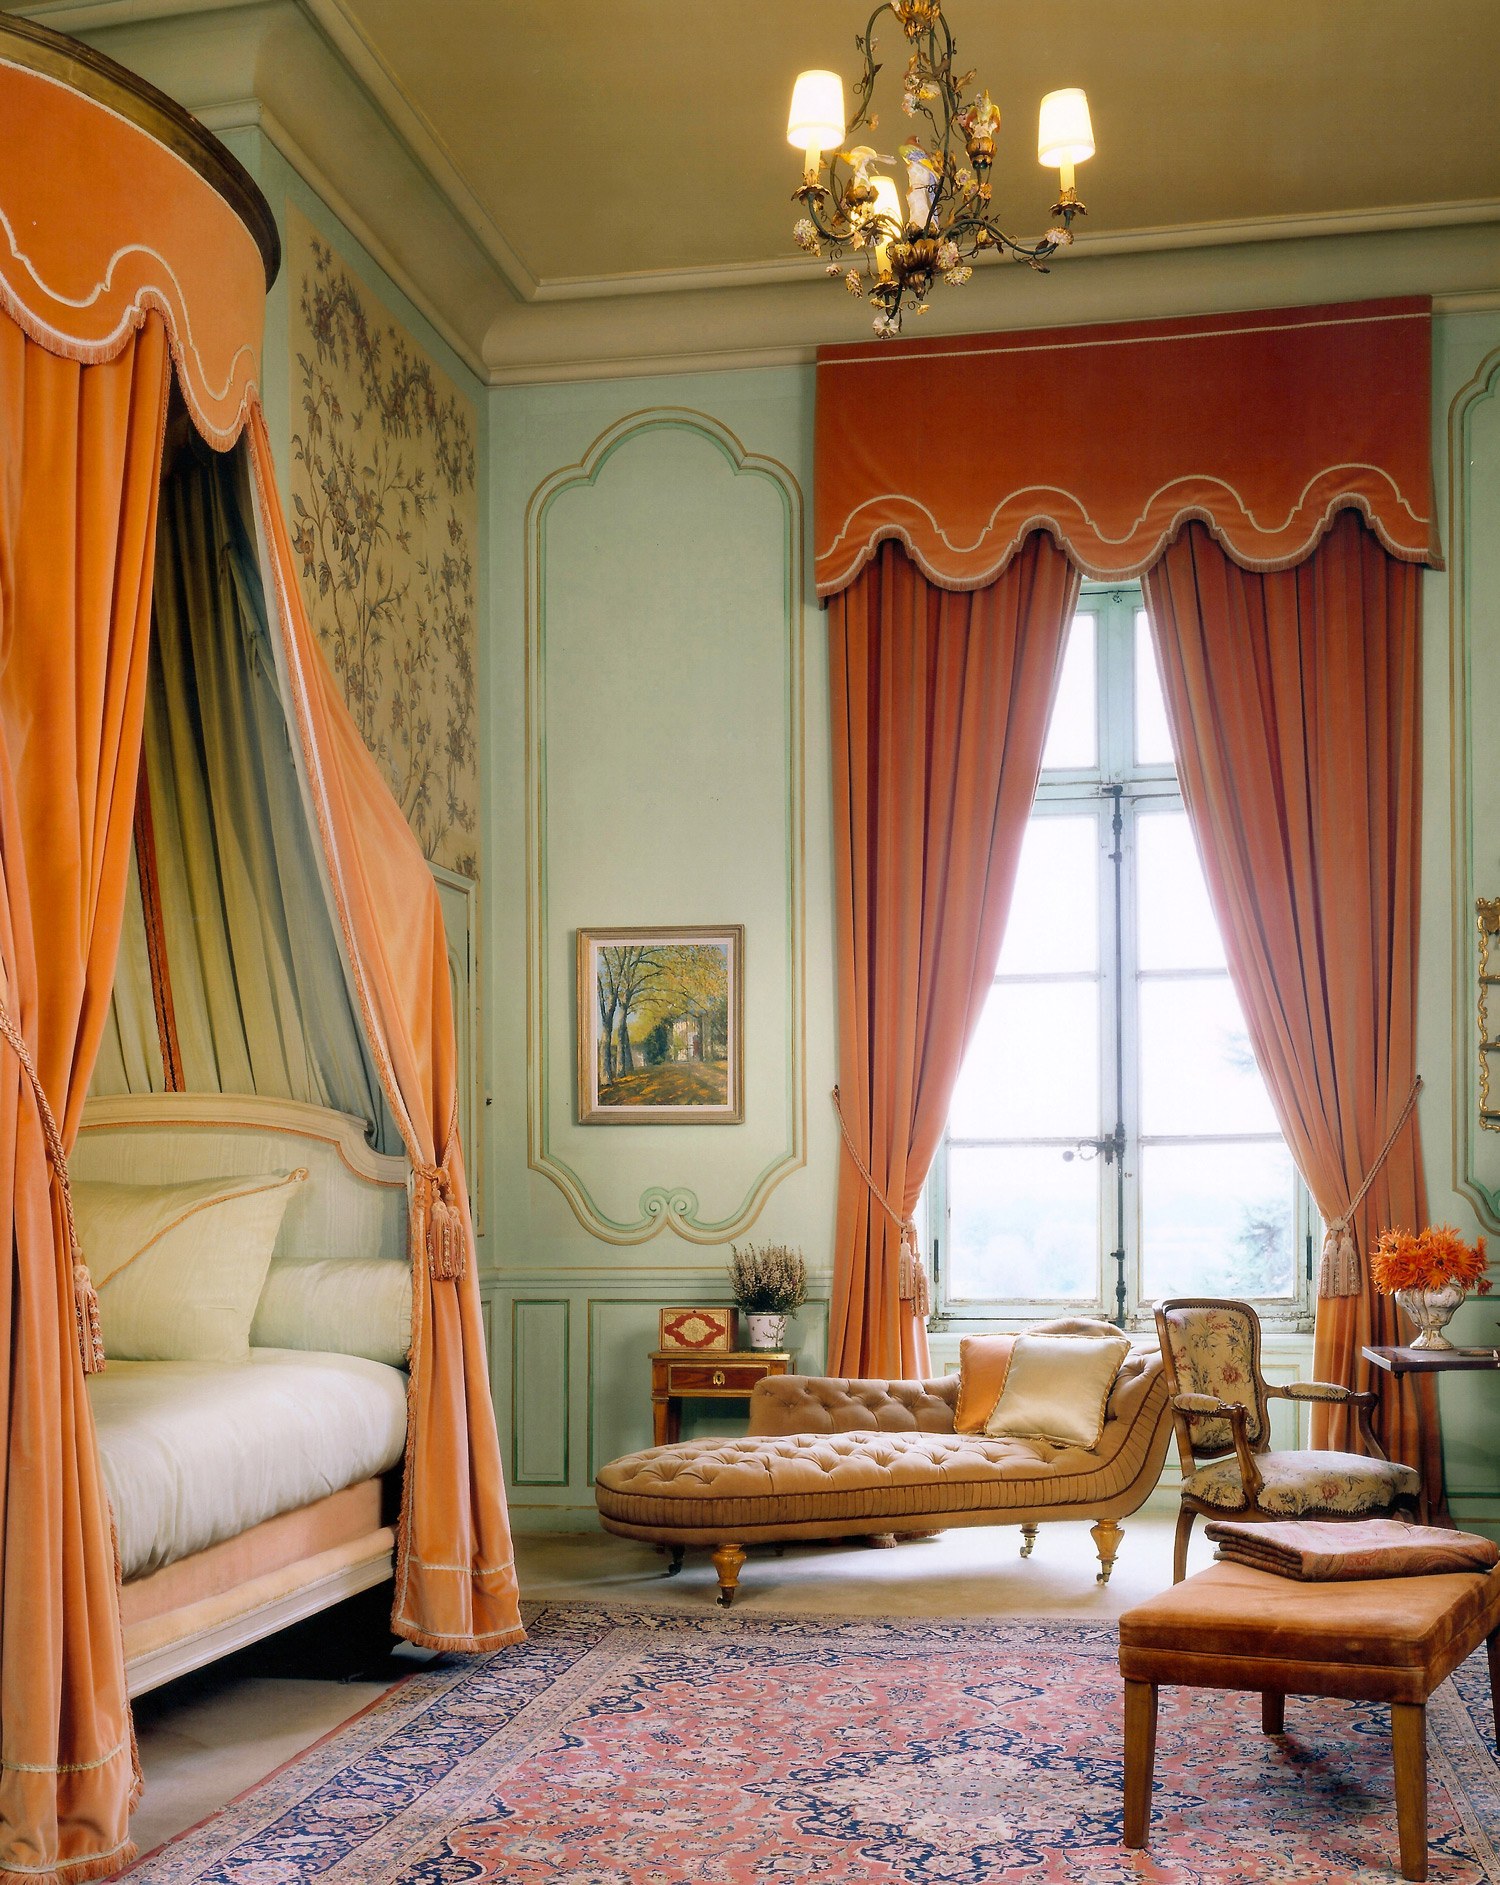   “Often the most unexpected color combinations prove the most interesting and inspiring. We wanted to bring new interest to a classical room, so we contrasted the walls, which were painted celadon, with intense burnt-orange curtains and bed draperies. Unexpected colors in traditional rooms make them seem more approachable and more modern.” Photo: Jim Bartsch  